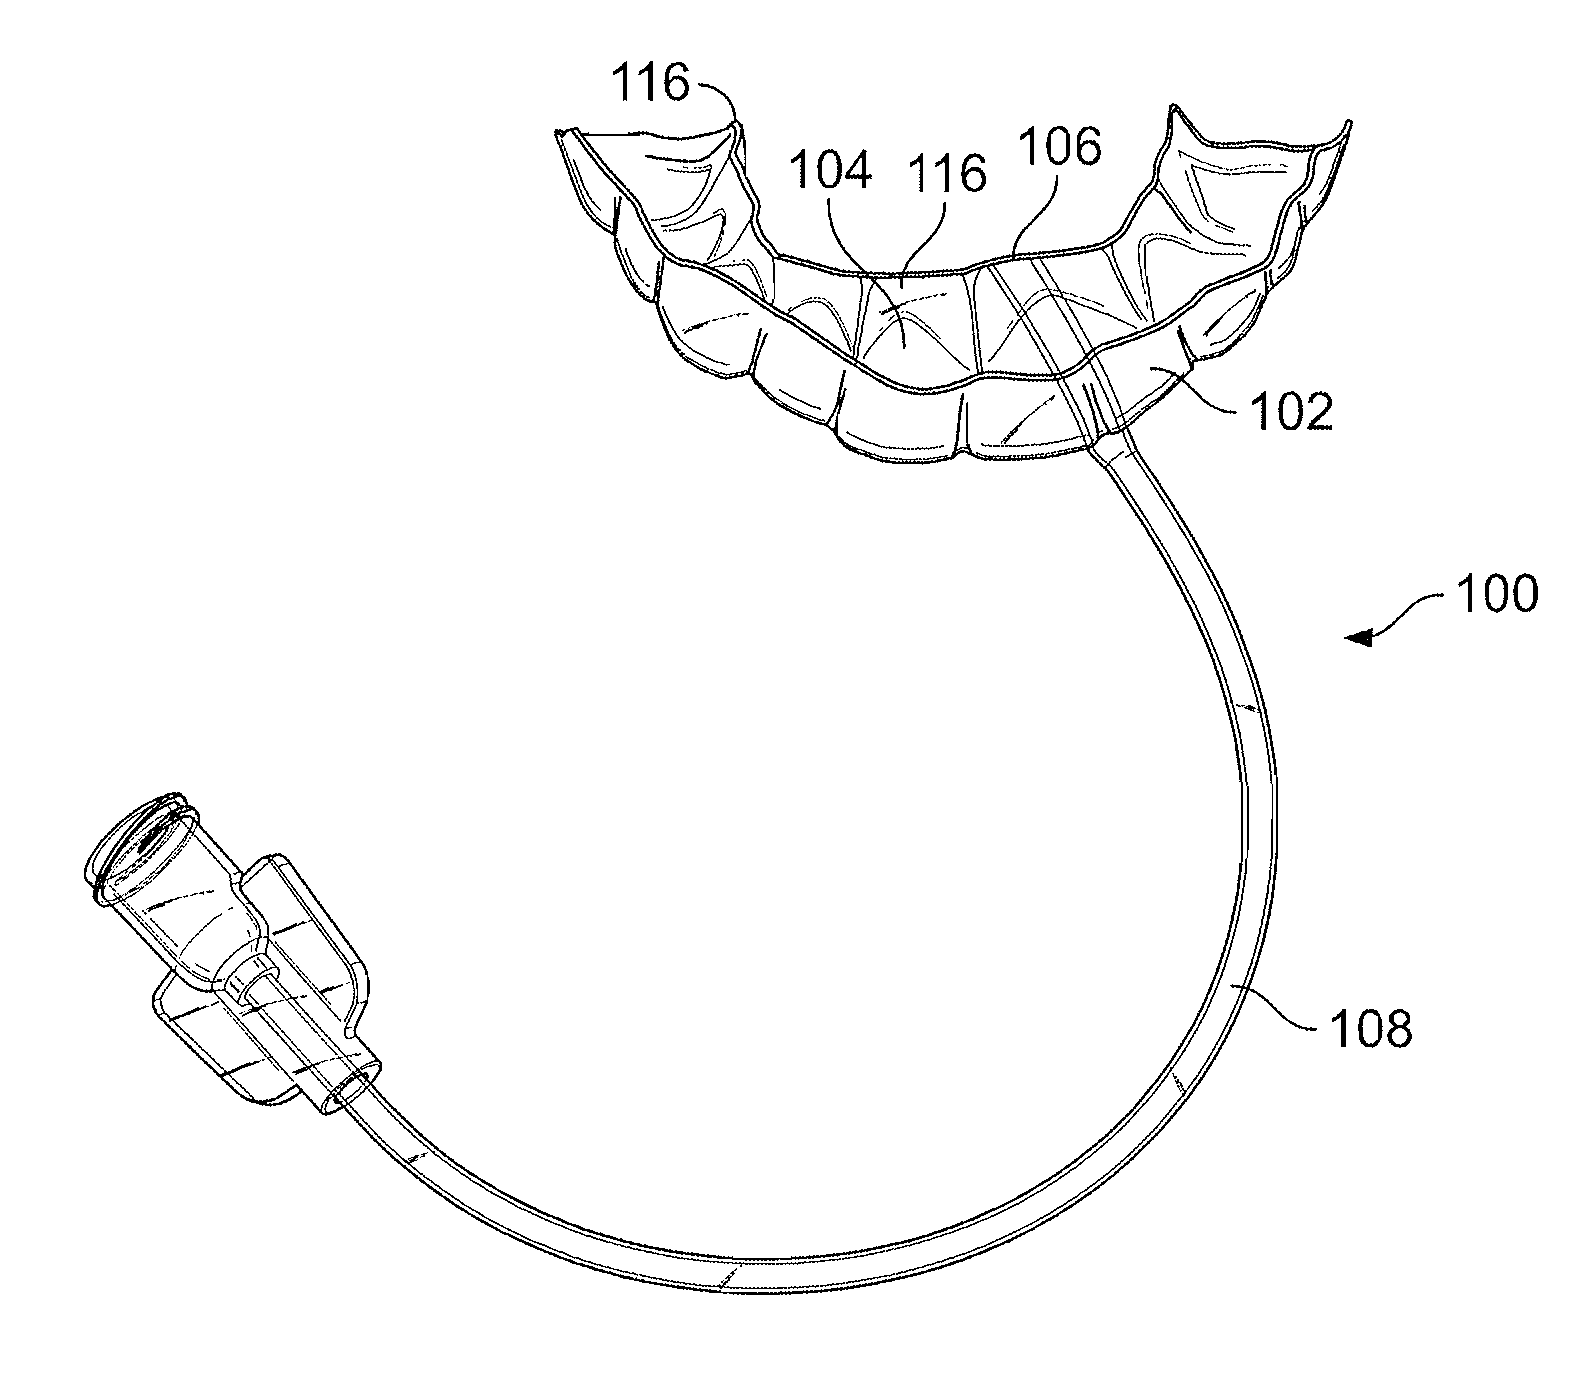 System and method for  delivering a therapy and sensing a biological activity in the mouth